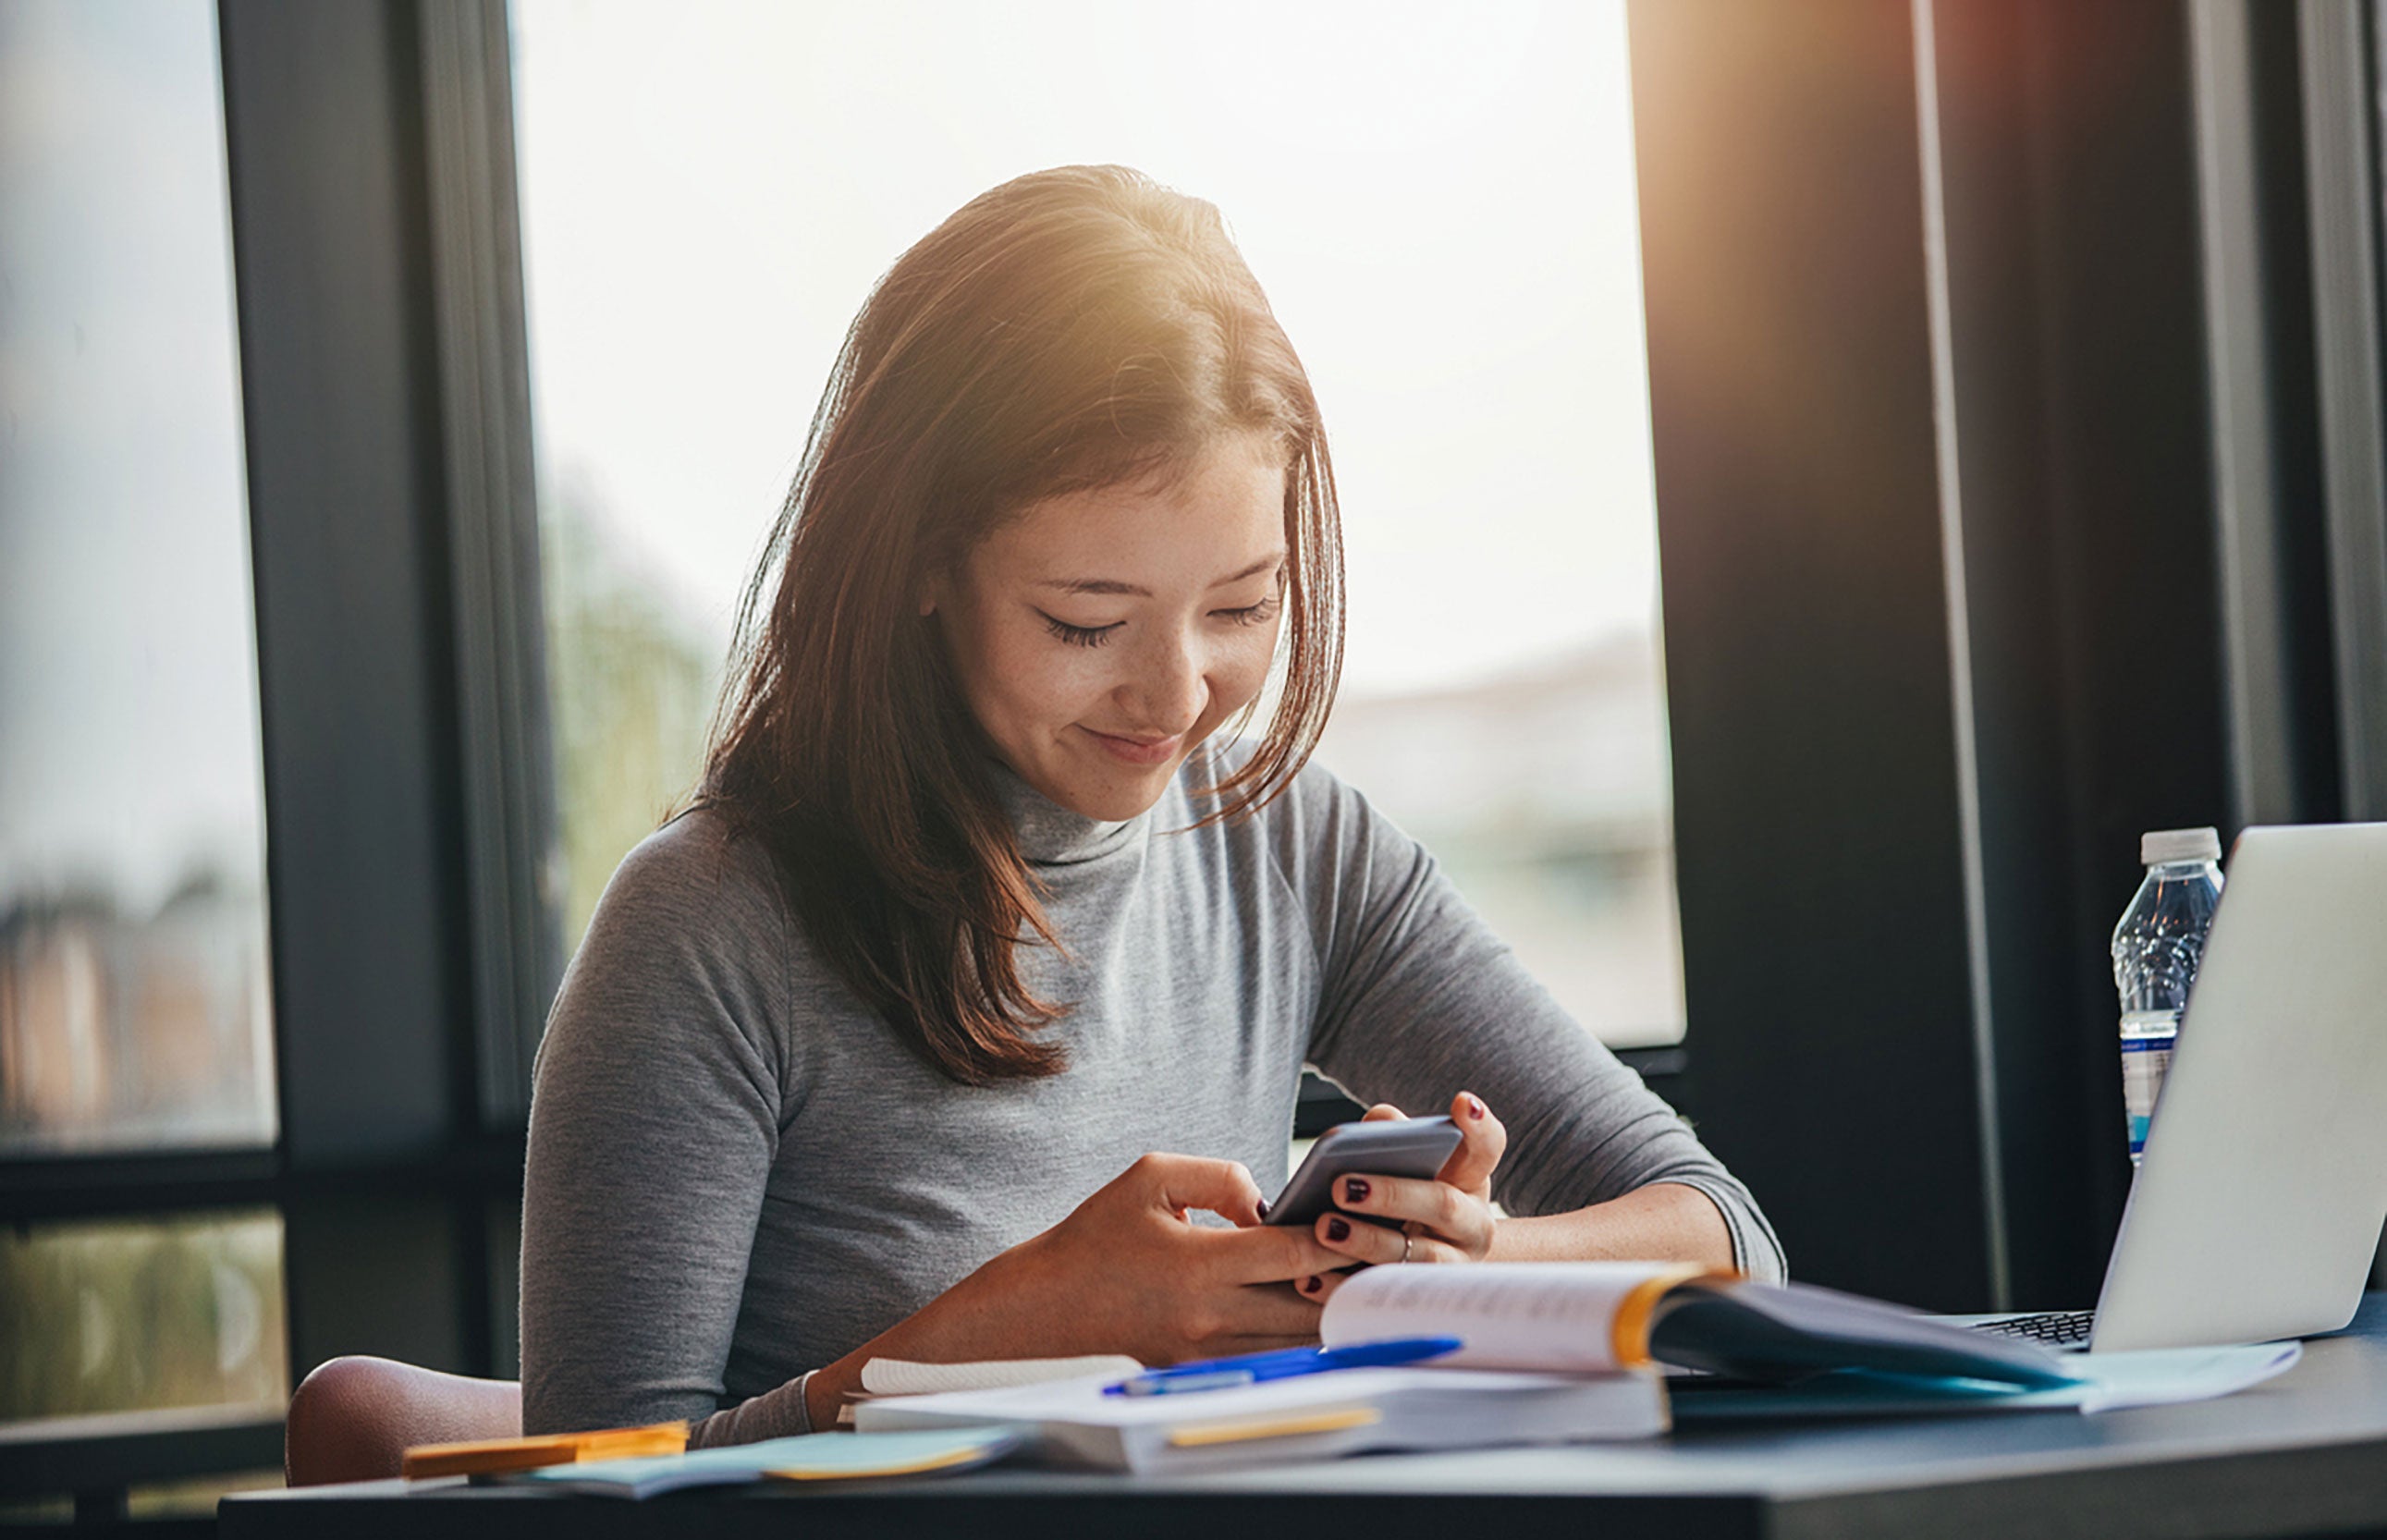 Student loans are a huge burden but they don't necessarily have to be. It's possible to lower your monthly student loan payment with the right tips.